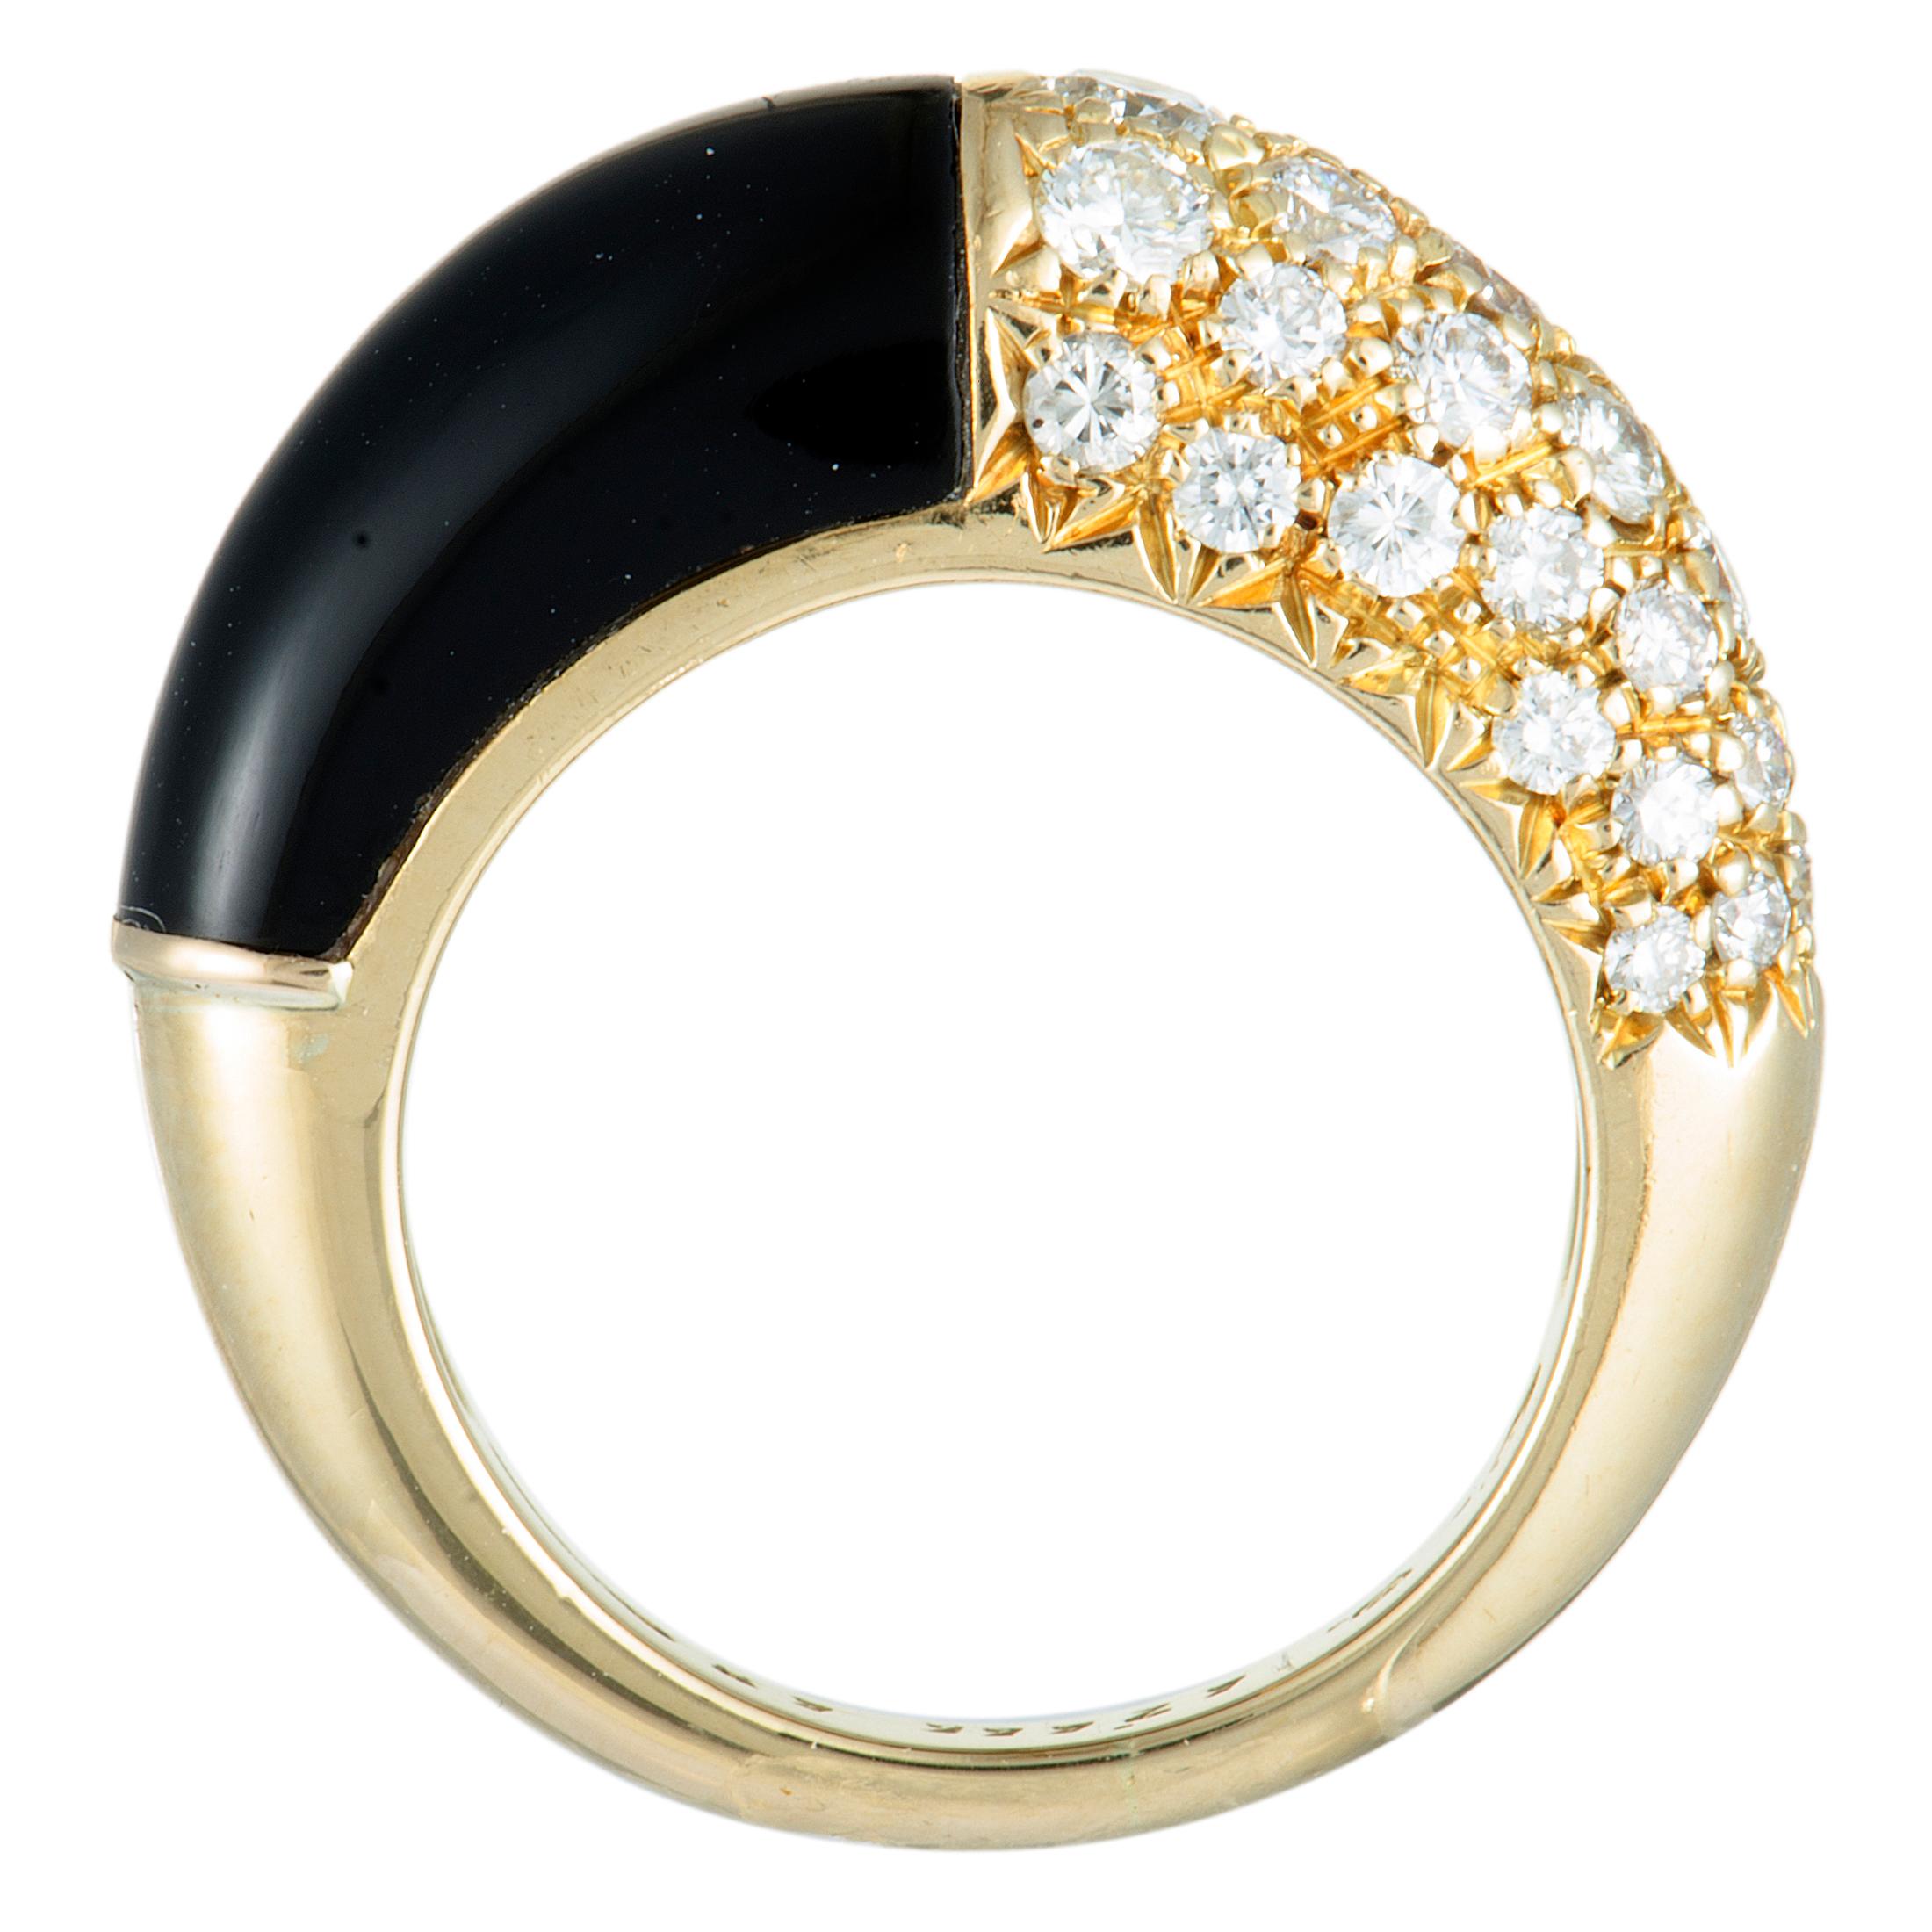 The striking contrast between the eye-catching onyx and the brightly dazzling diamonds gives a stunningly fashionable yet distinctly luxe appeal to this fascinating vintage piece. Designed by Cartier, the ring is made of 18K yellow gold and it is